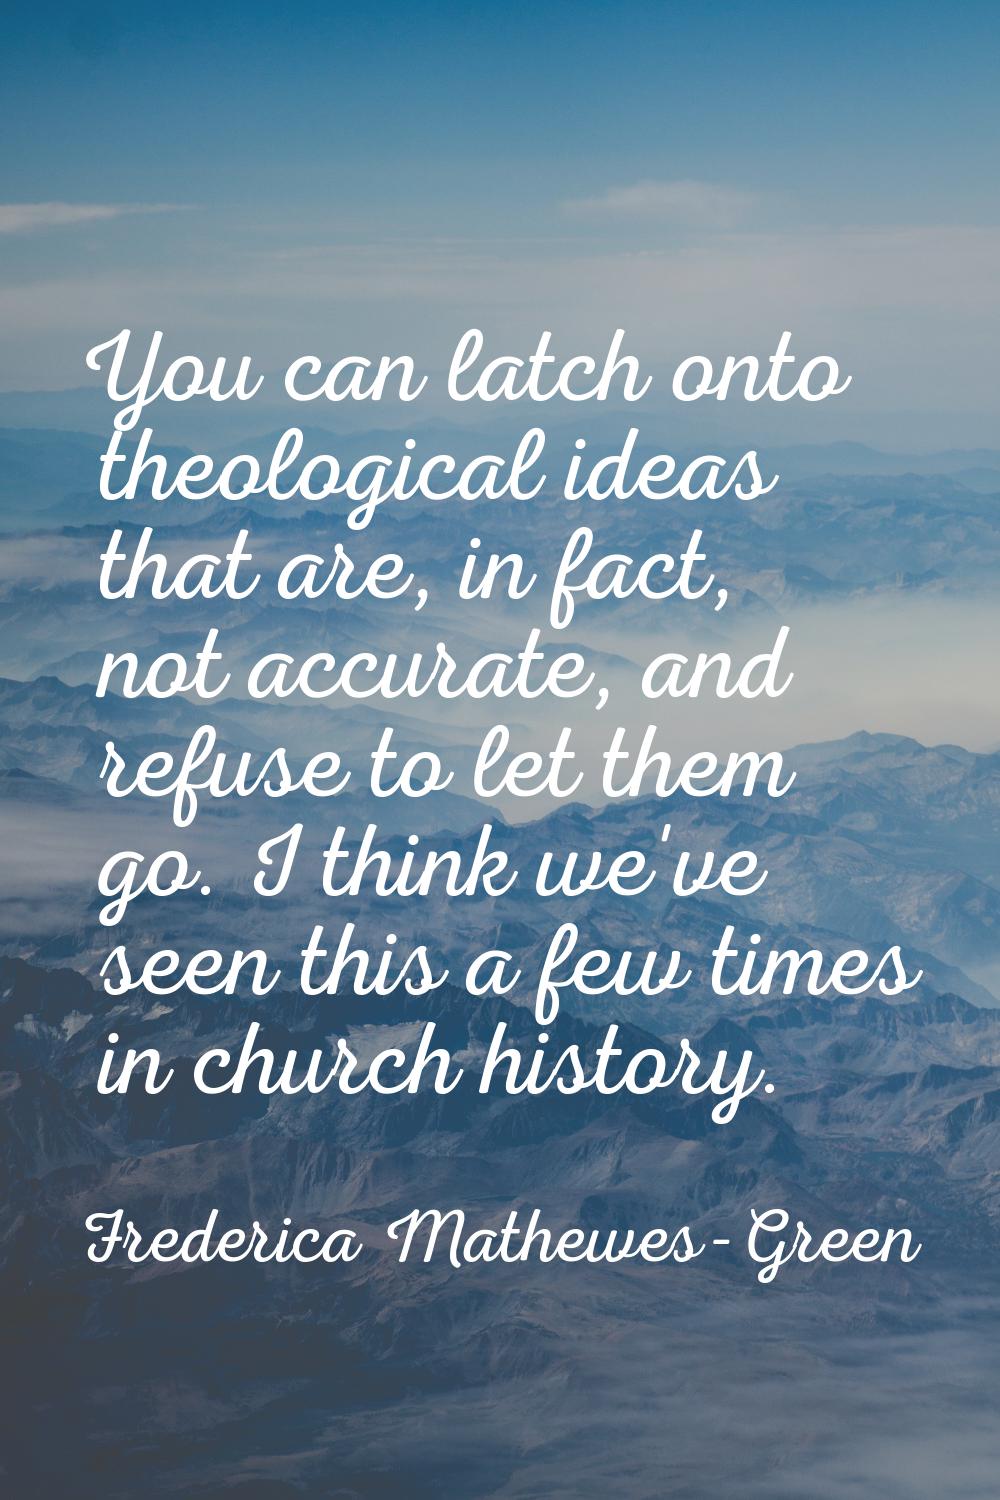 You can latch onto theological ideas that are, in fact, not accurate, and refuse to let them go. I 